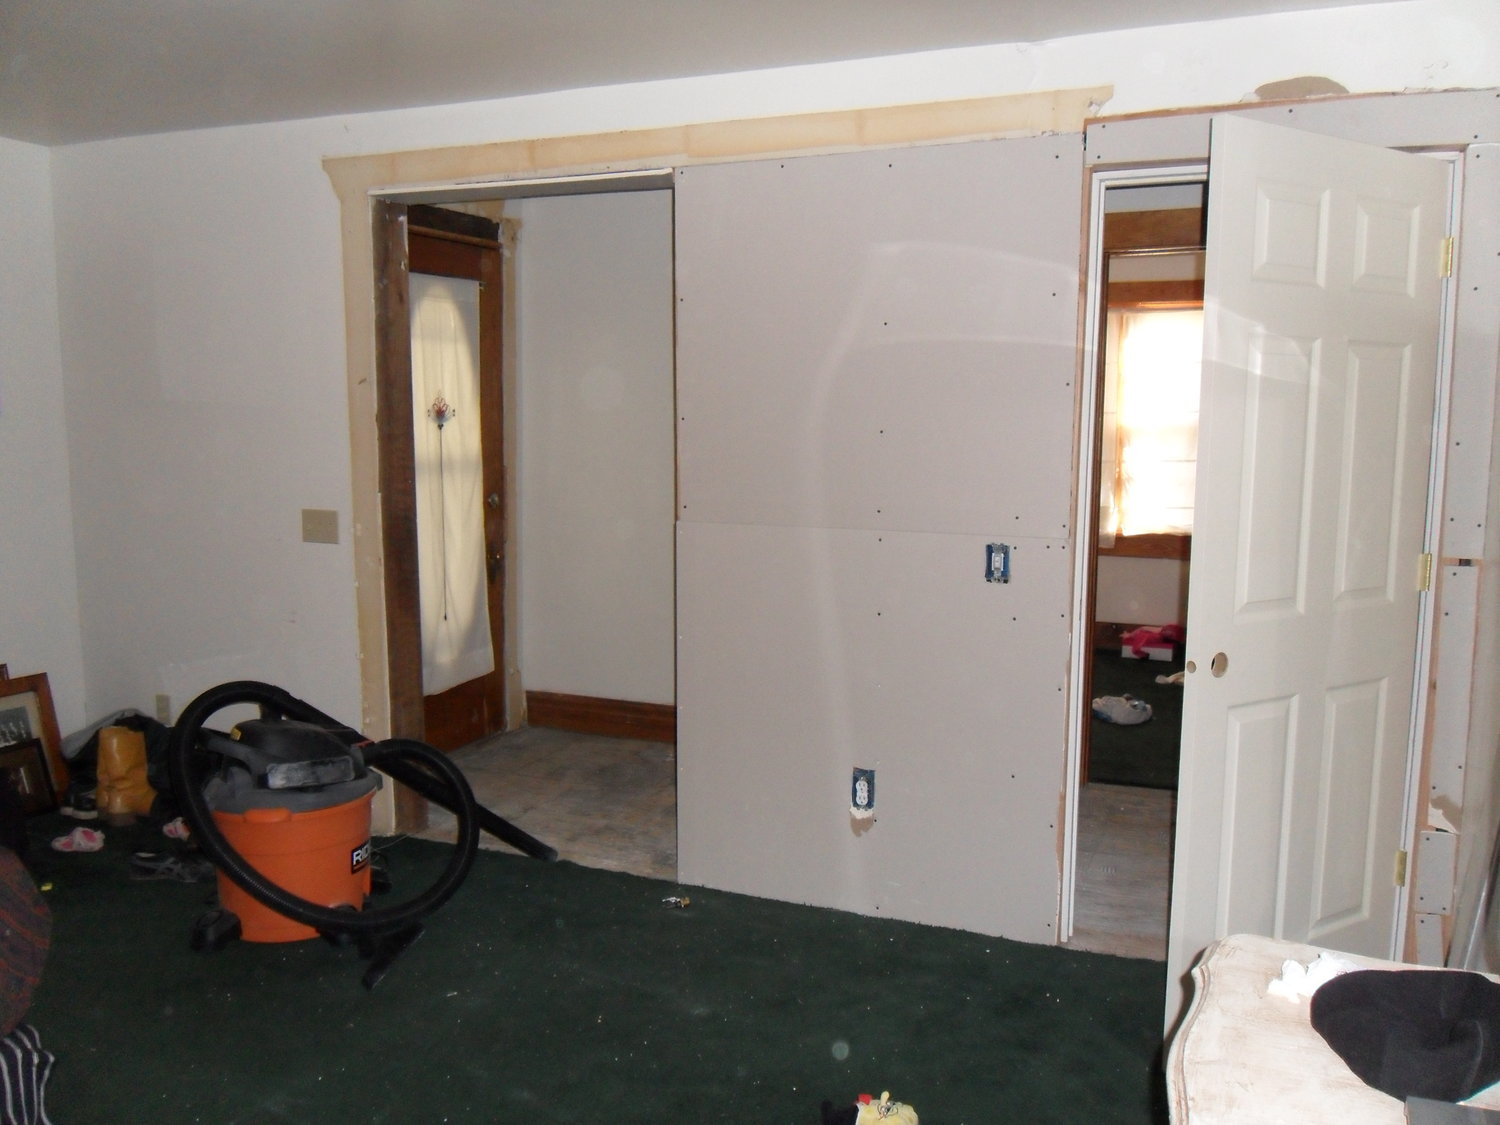 Archway framed in for a closet and new bedroom door. Notice the front door is still in place.